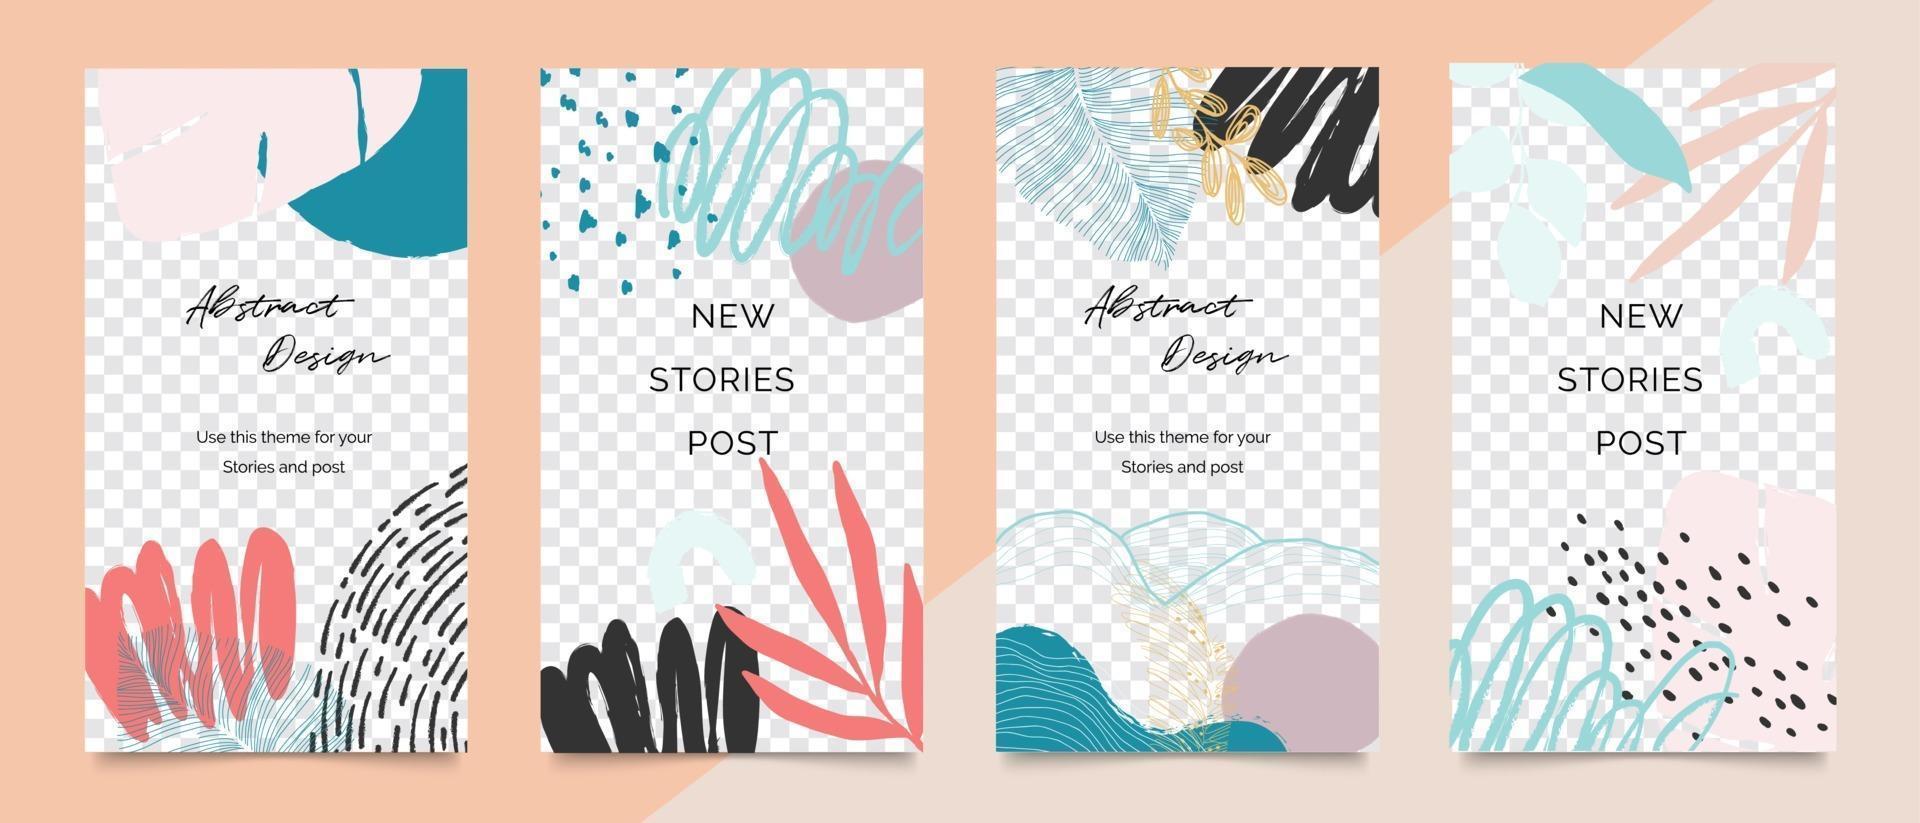 Social media post and stories background vector. Cover template. vector